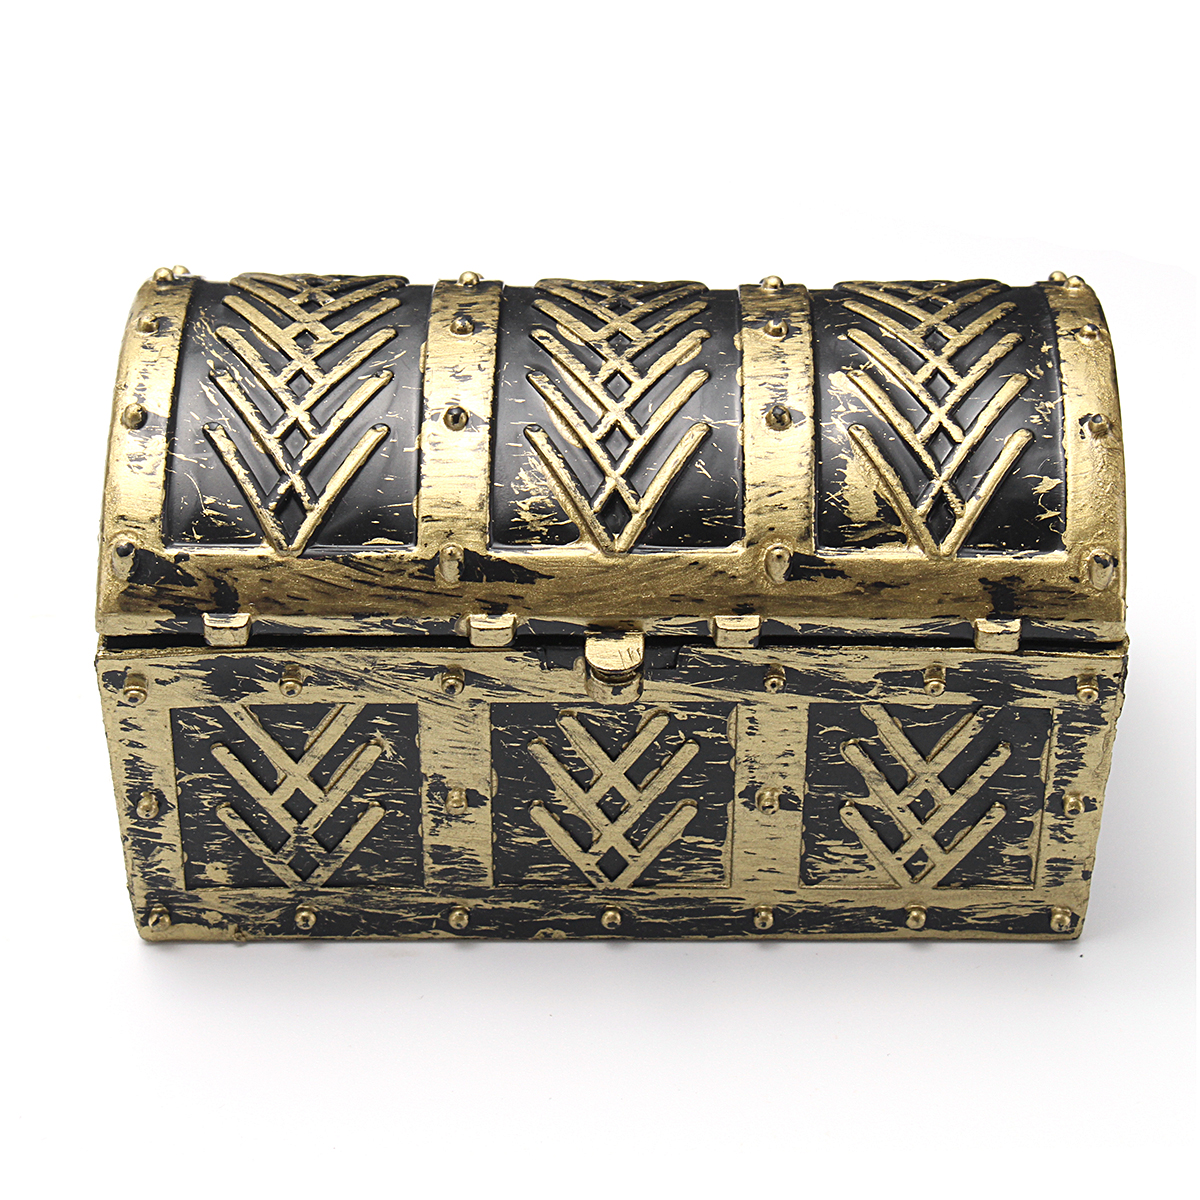 

Vintage Pirate Jewelry Storage Box Holder Treasure Chest Gift Box Bag For Necklace Bracelets